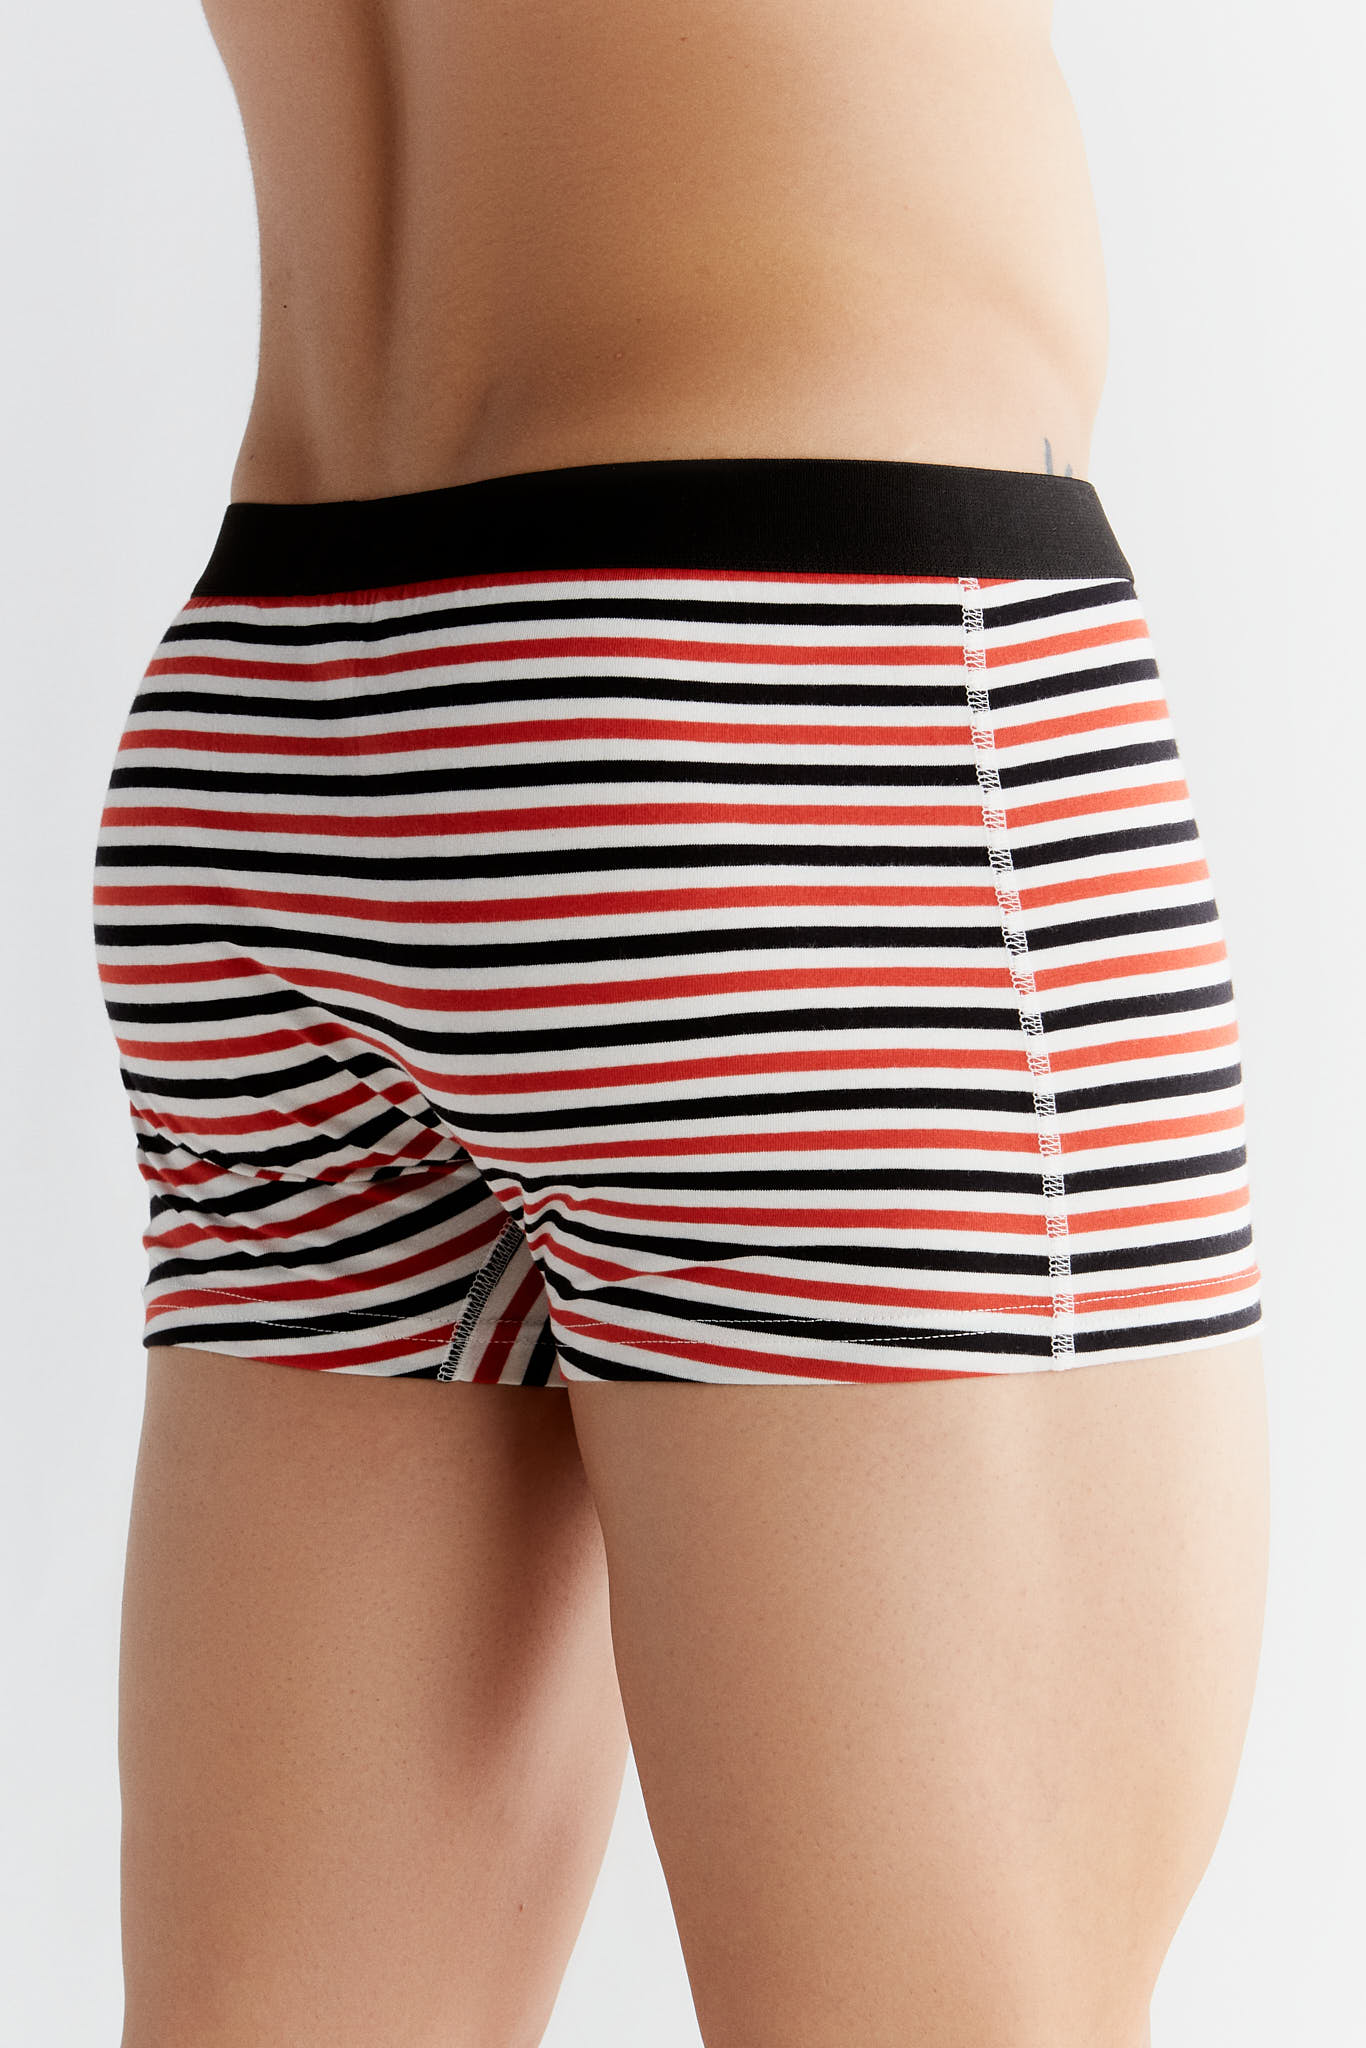 2121-13 | Trunk shorts striped,Off-White-Red-Black